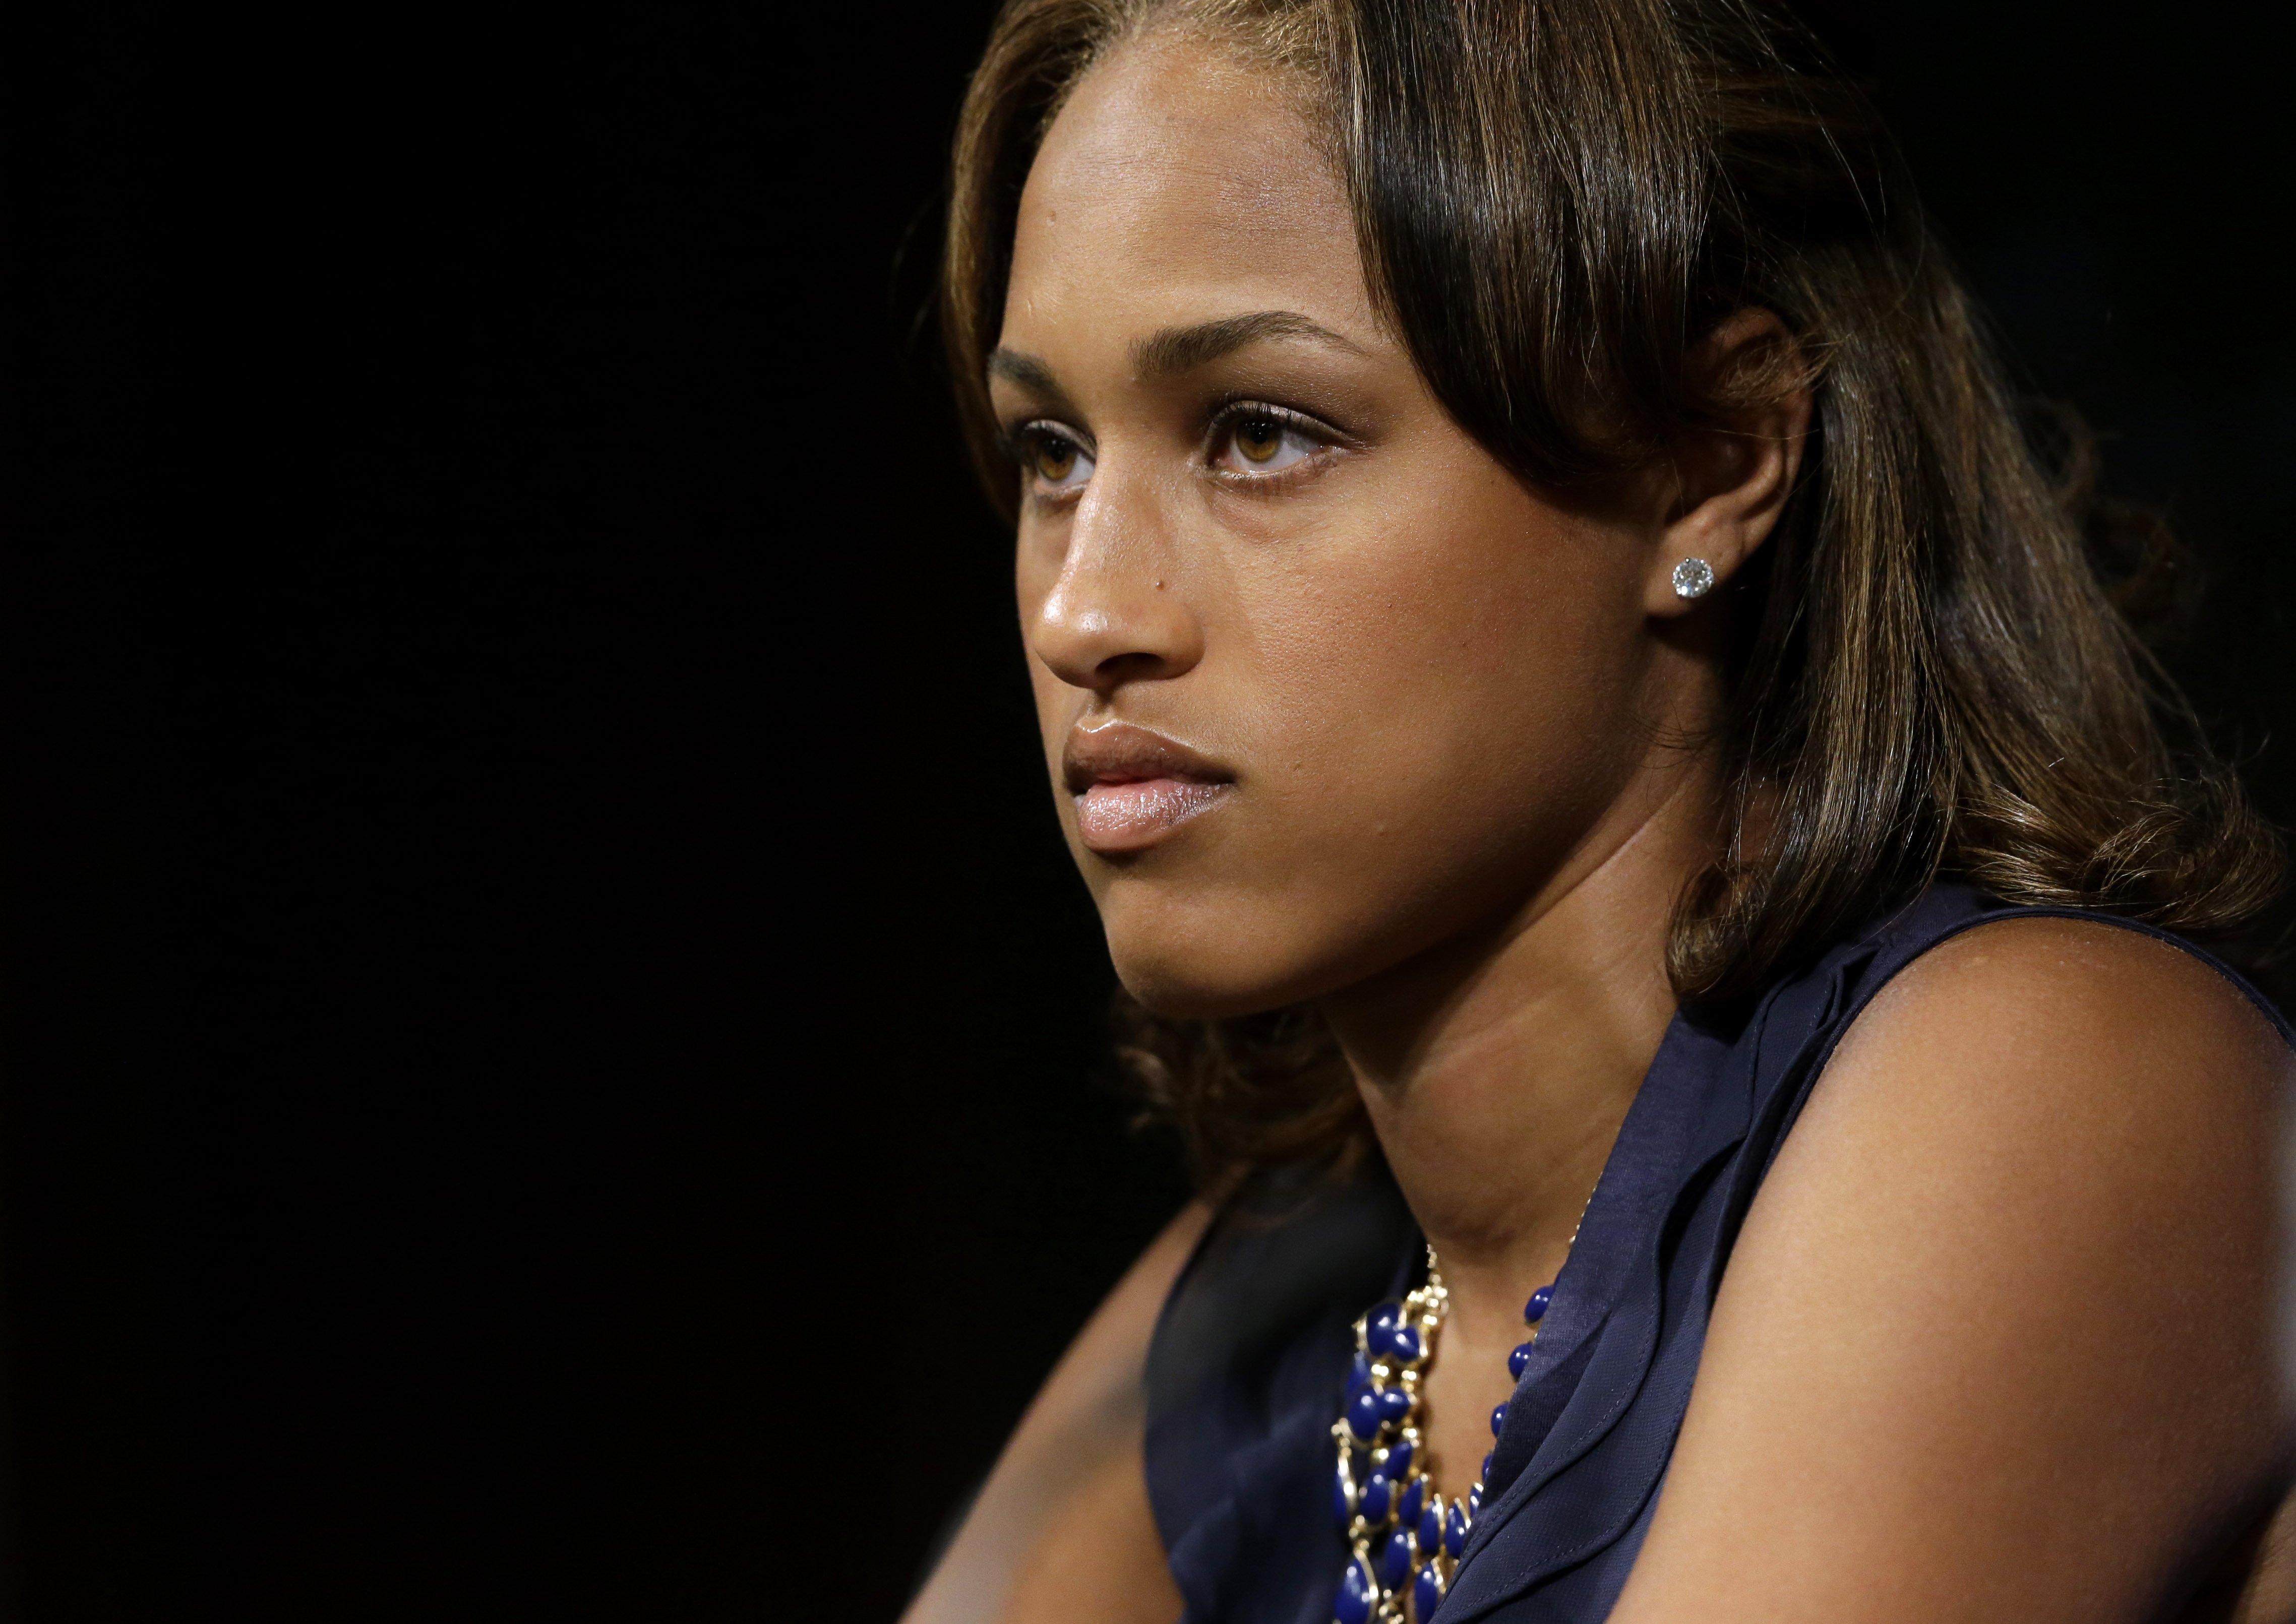 Janay Rice listens as her husband, Baltimore Ravens running back Ray Rice, speaks during a news conference at the team's practice facility in Owings Mills, Md on May 23, 2014. (Patrick Semansky—AP)